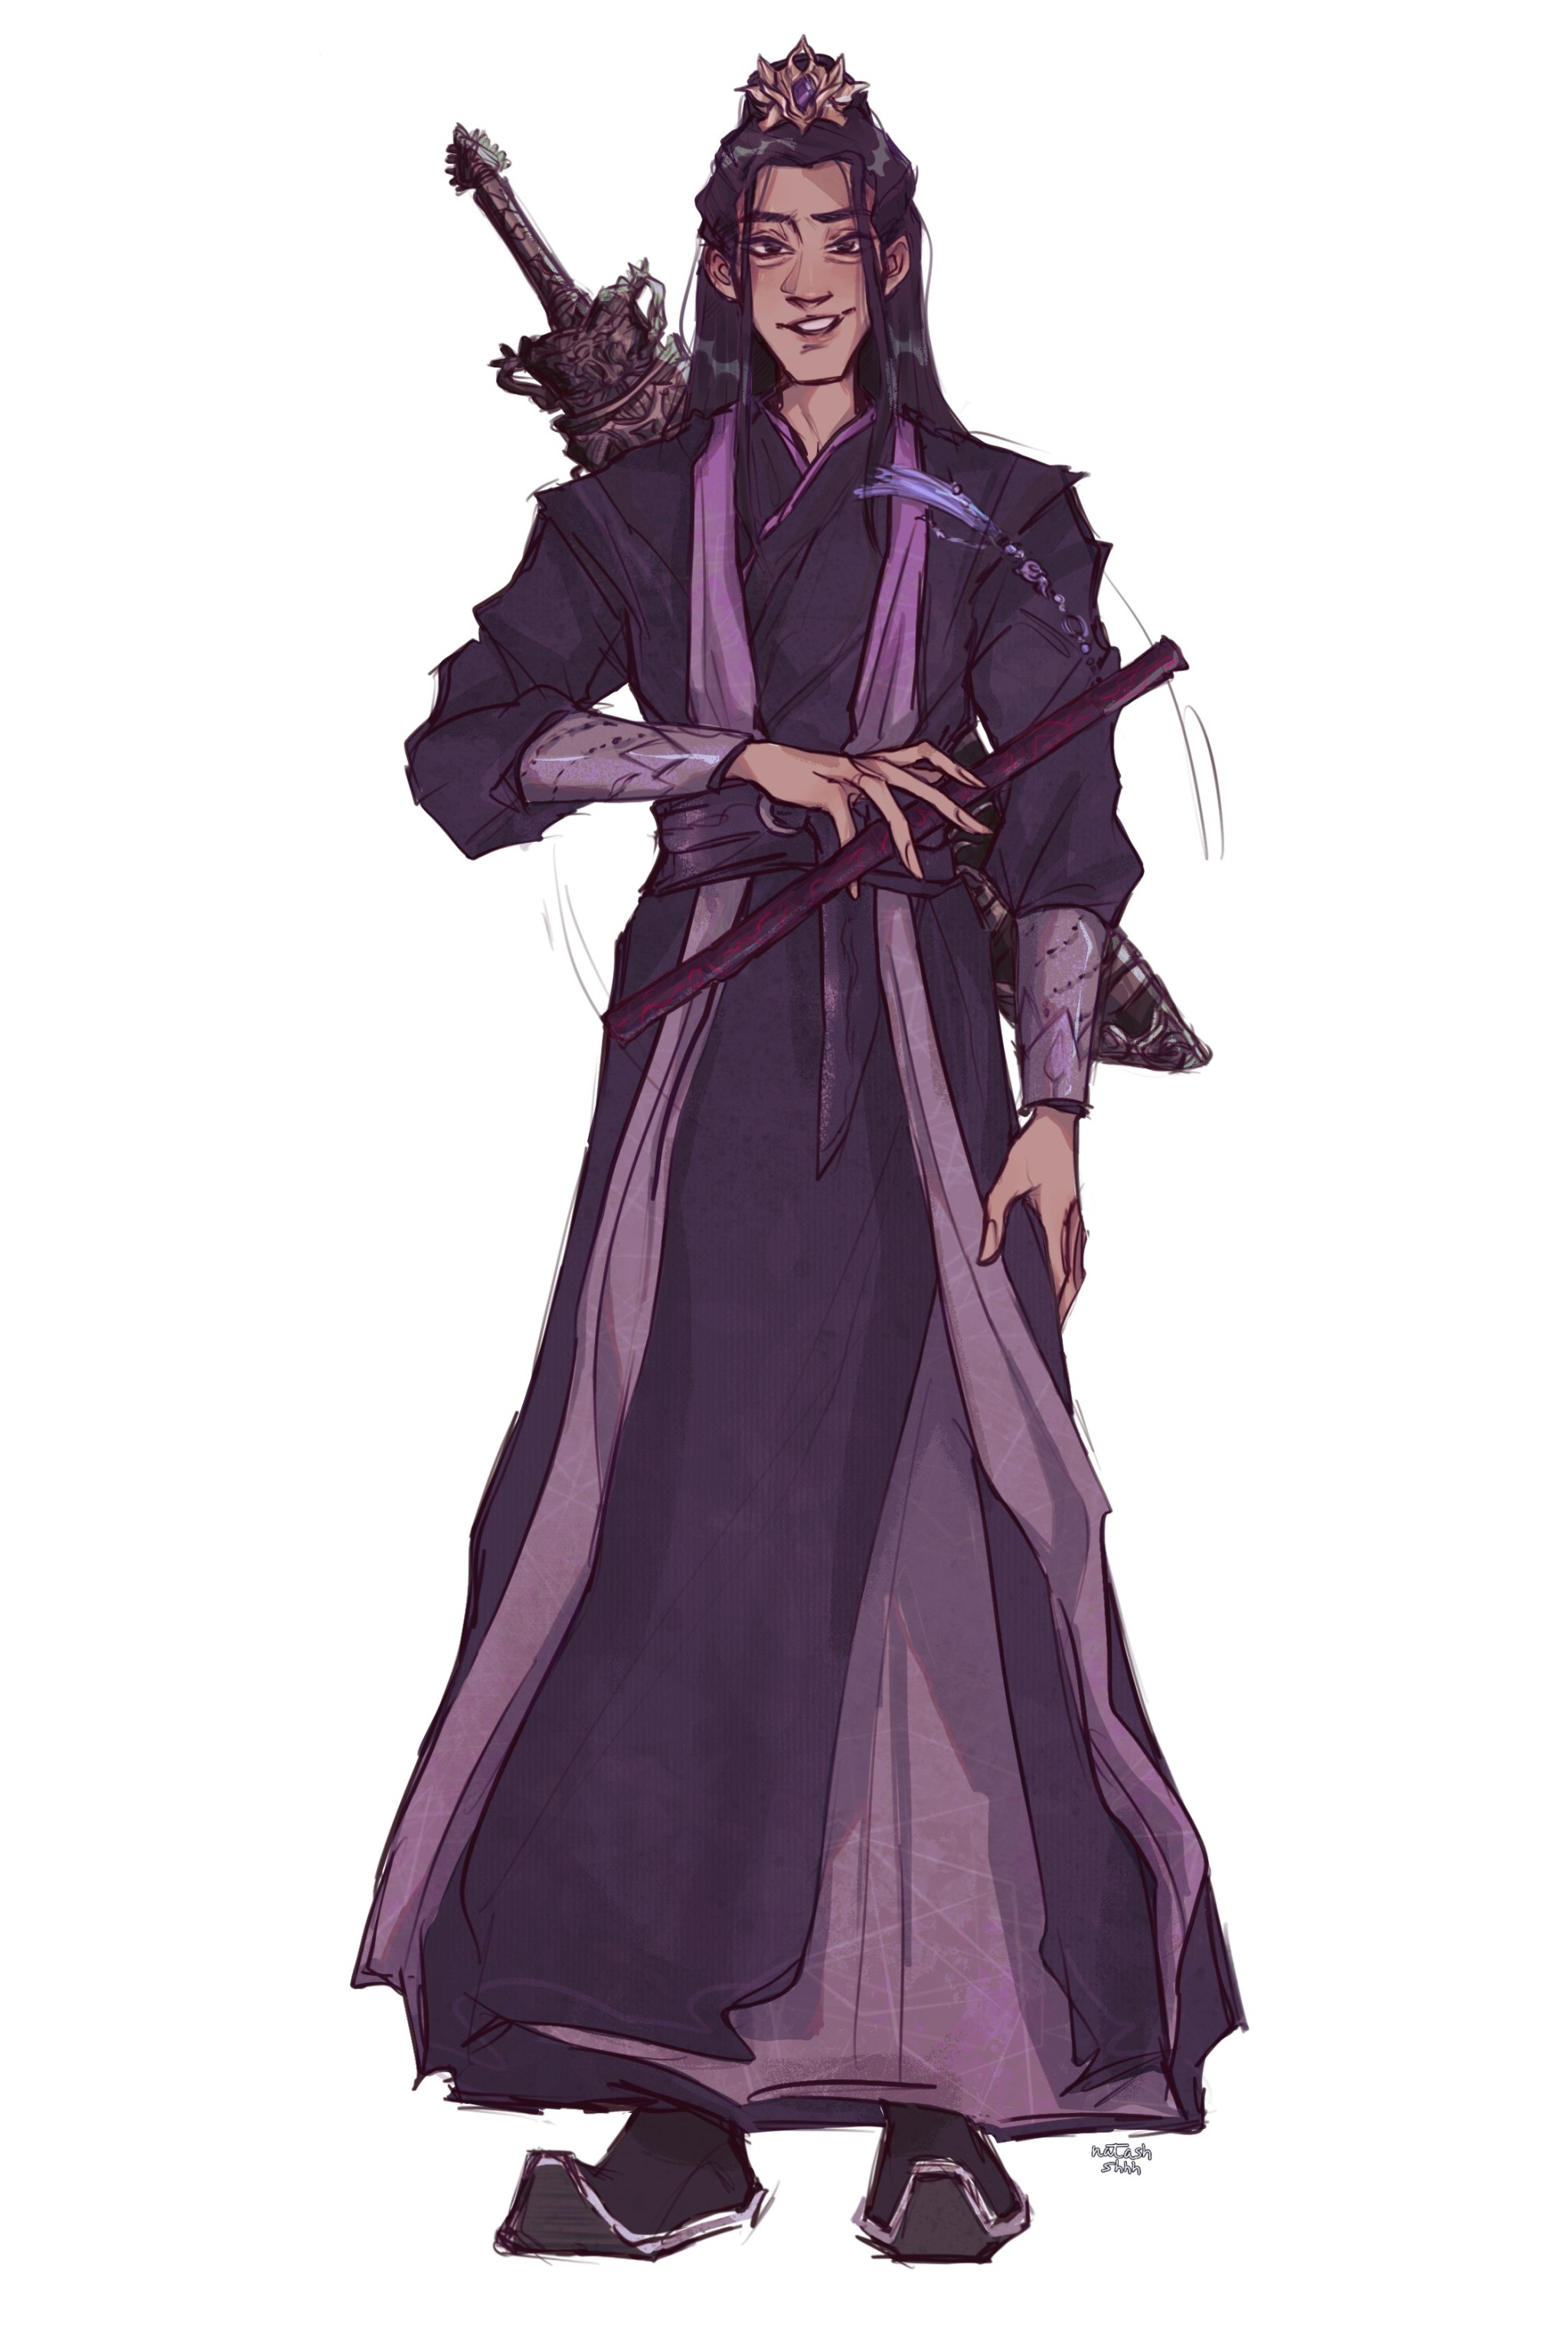 Wei Wuxian, Commission done by Natash-ssh on Tumblr